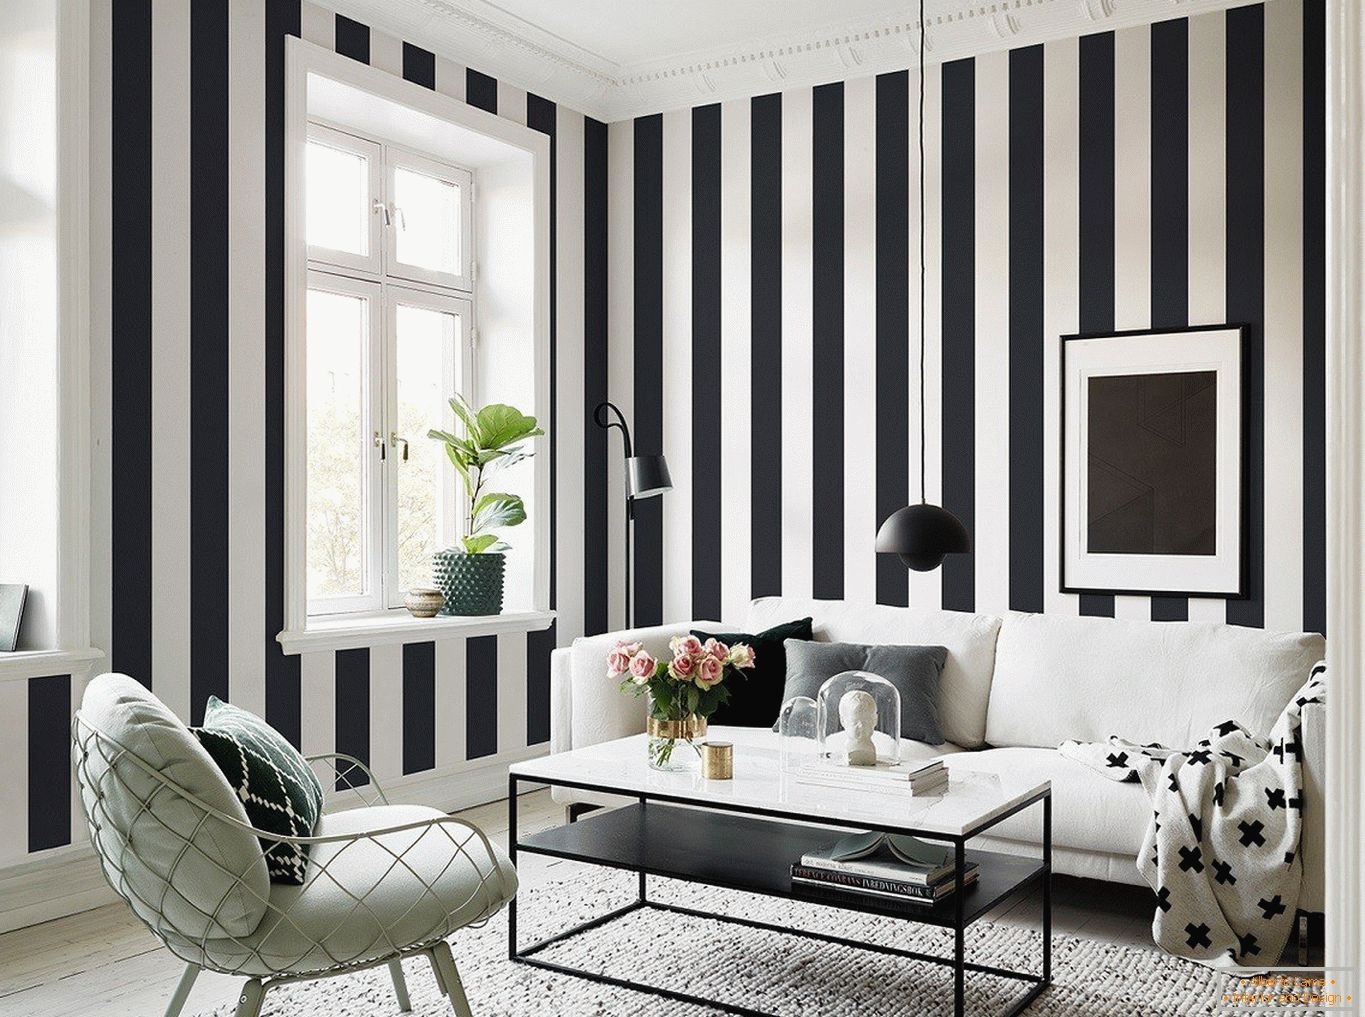 Wall-papers in a vertical stripes